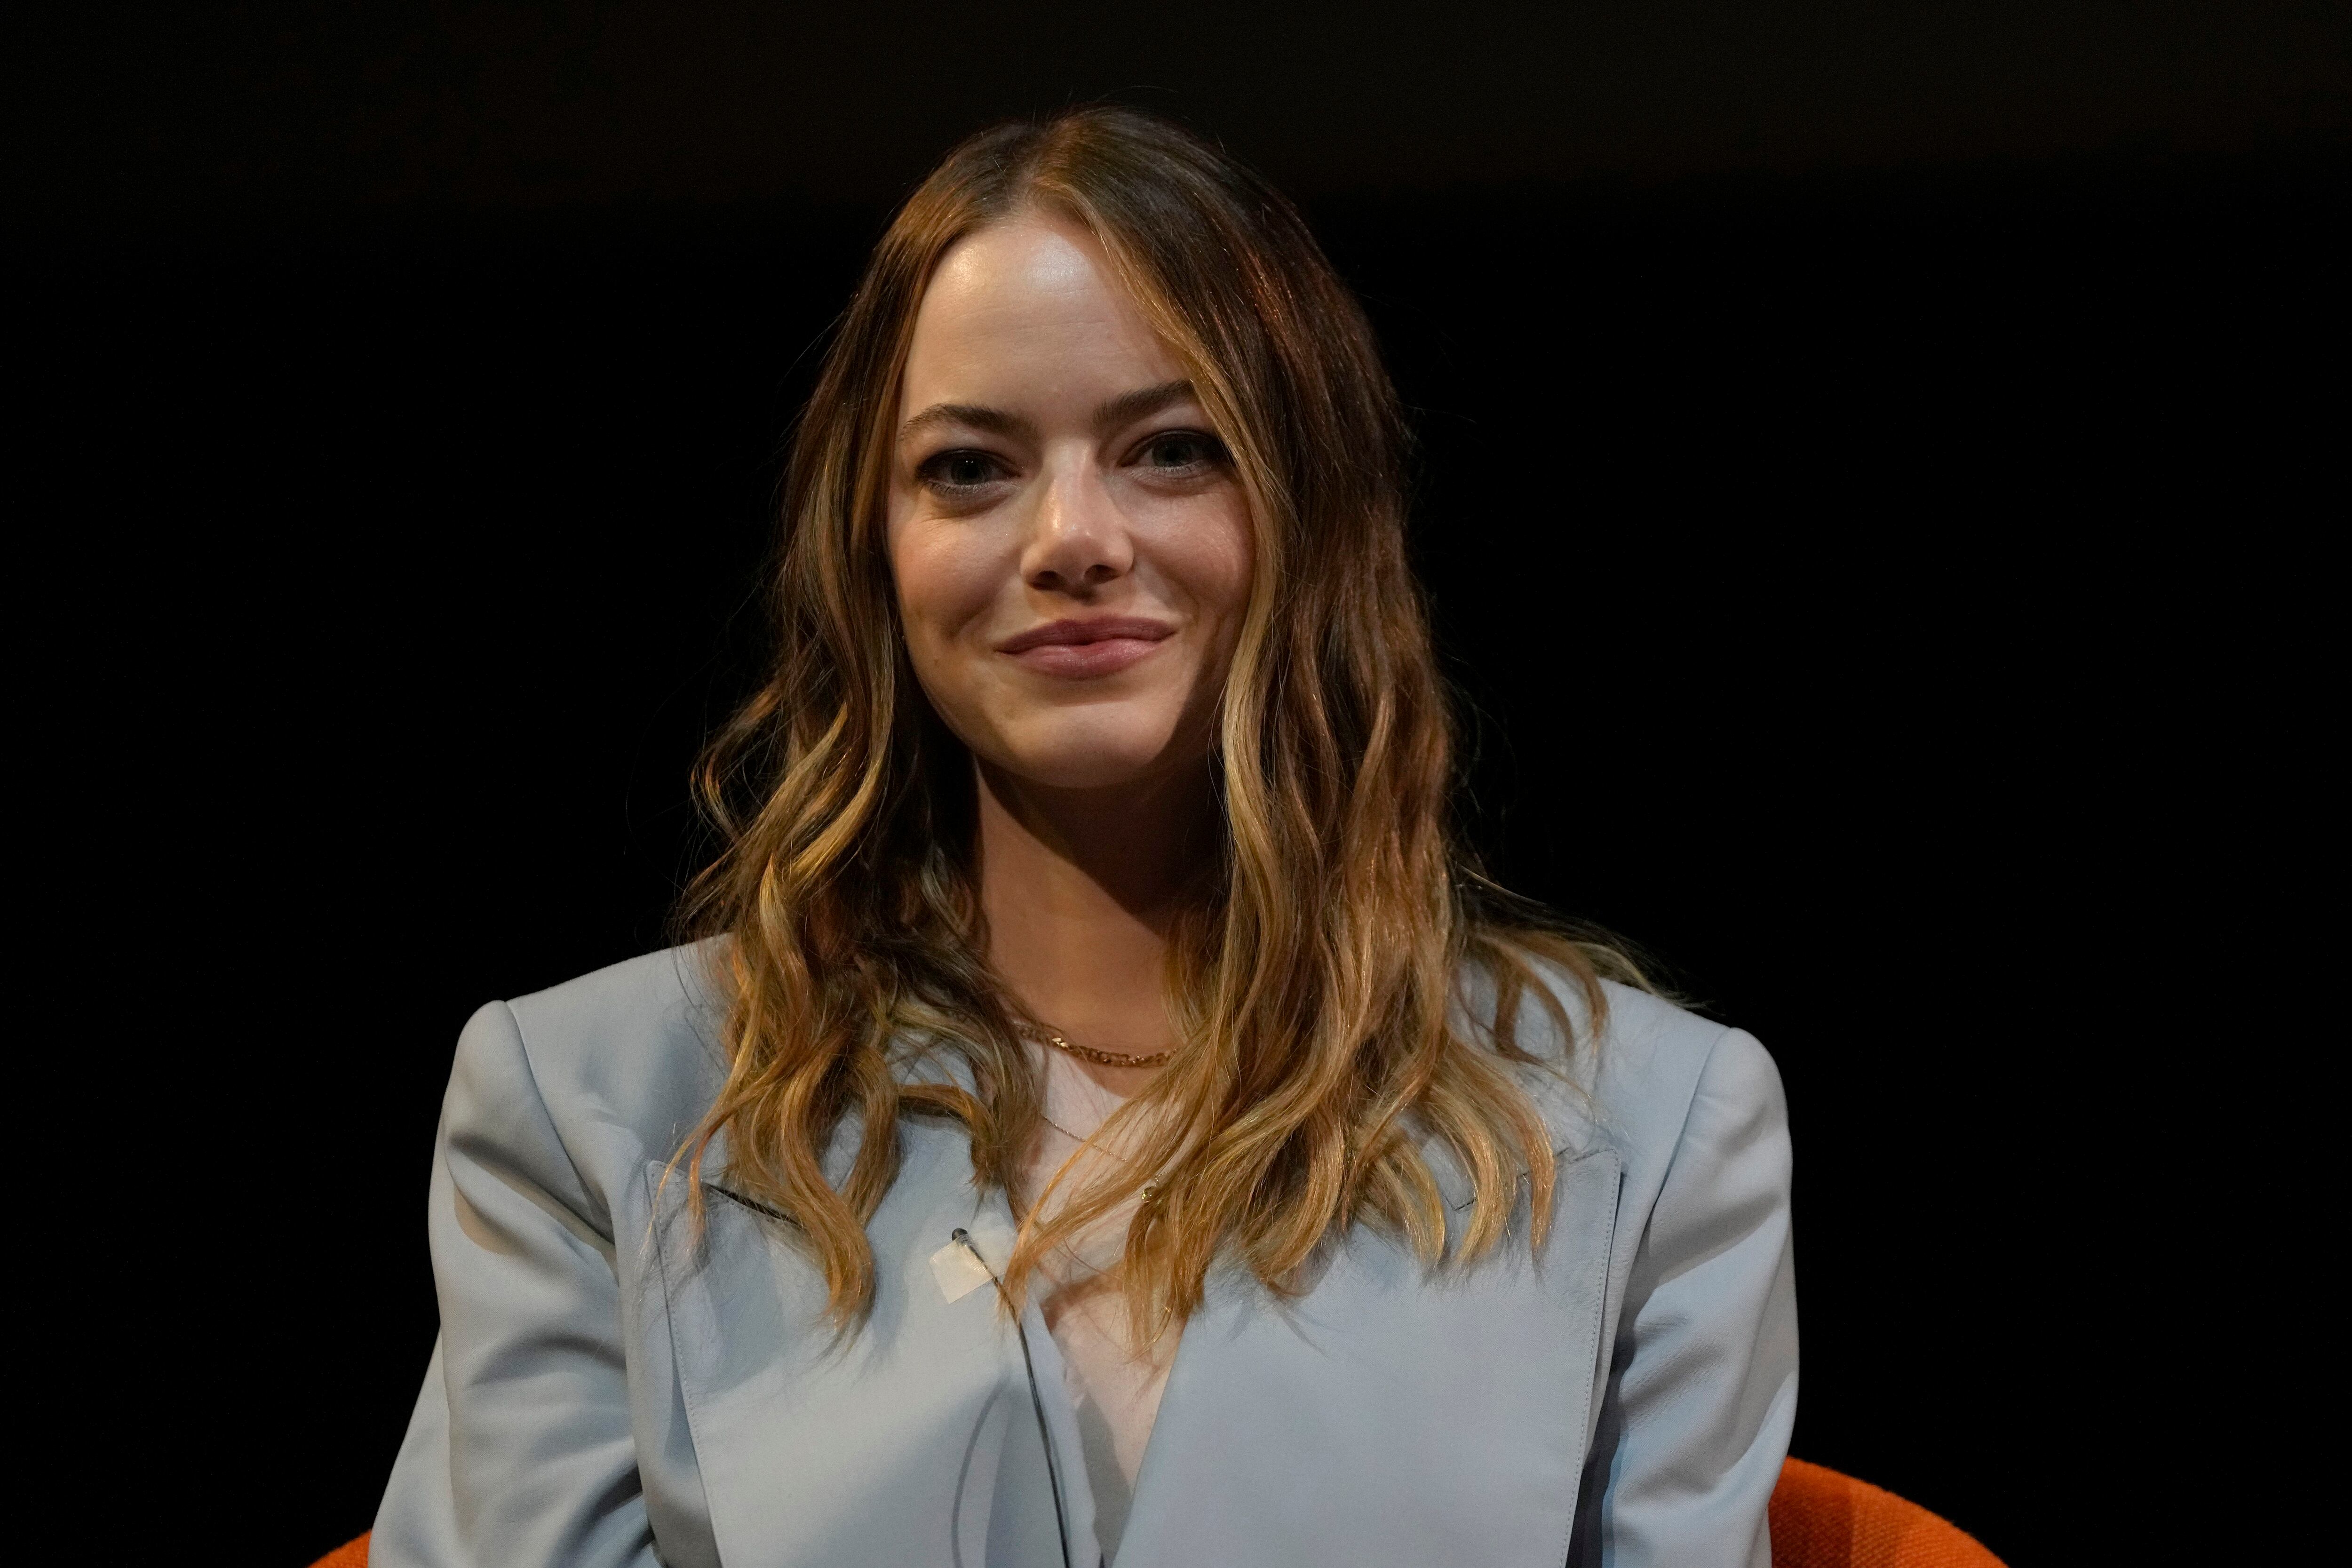 Emma Stone Wore a Dreamy Gray Suit to a Film Screening in Greece